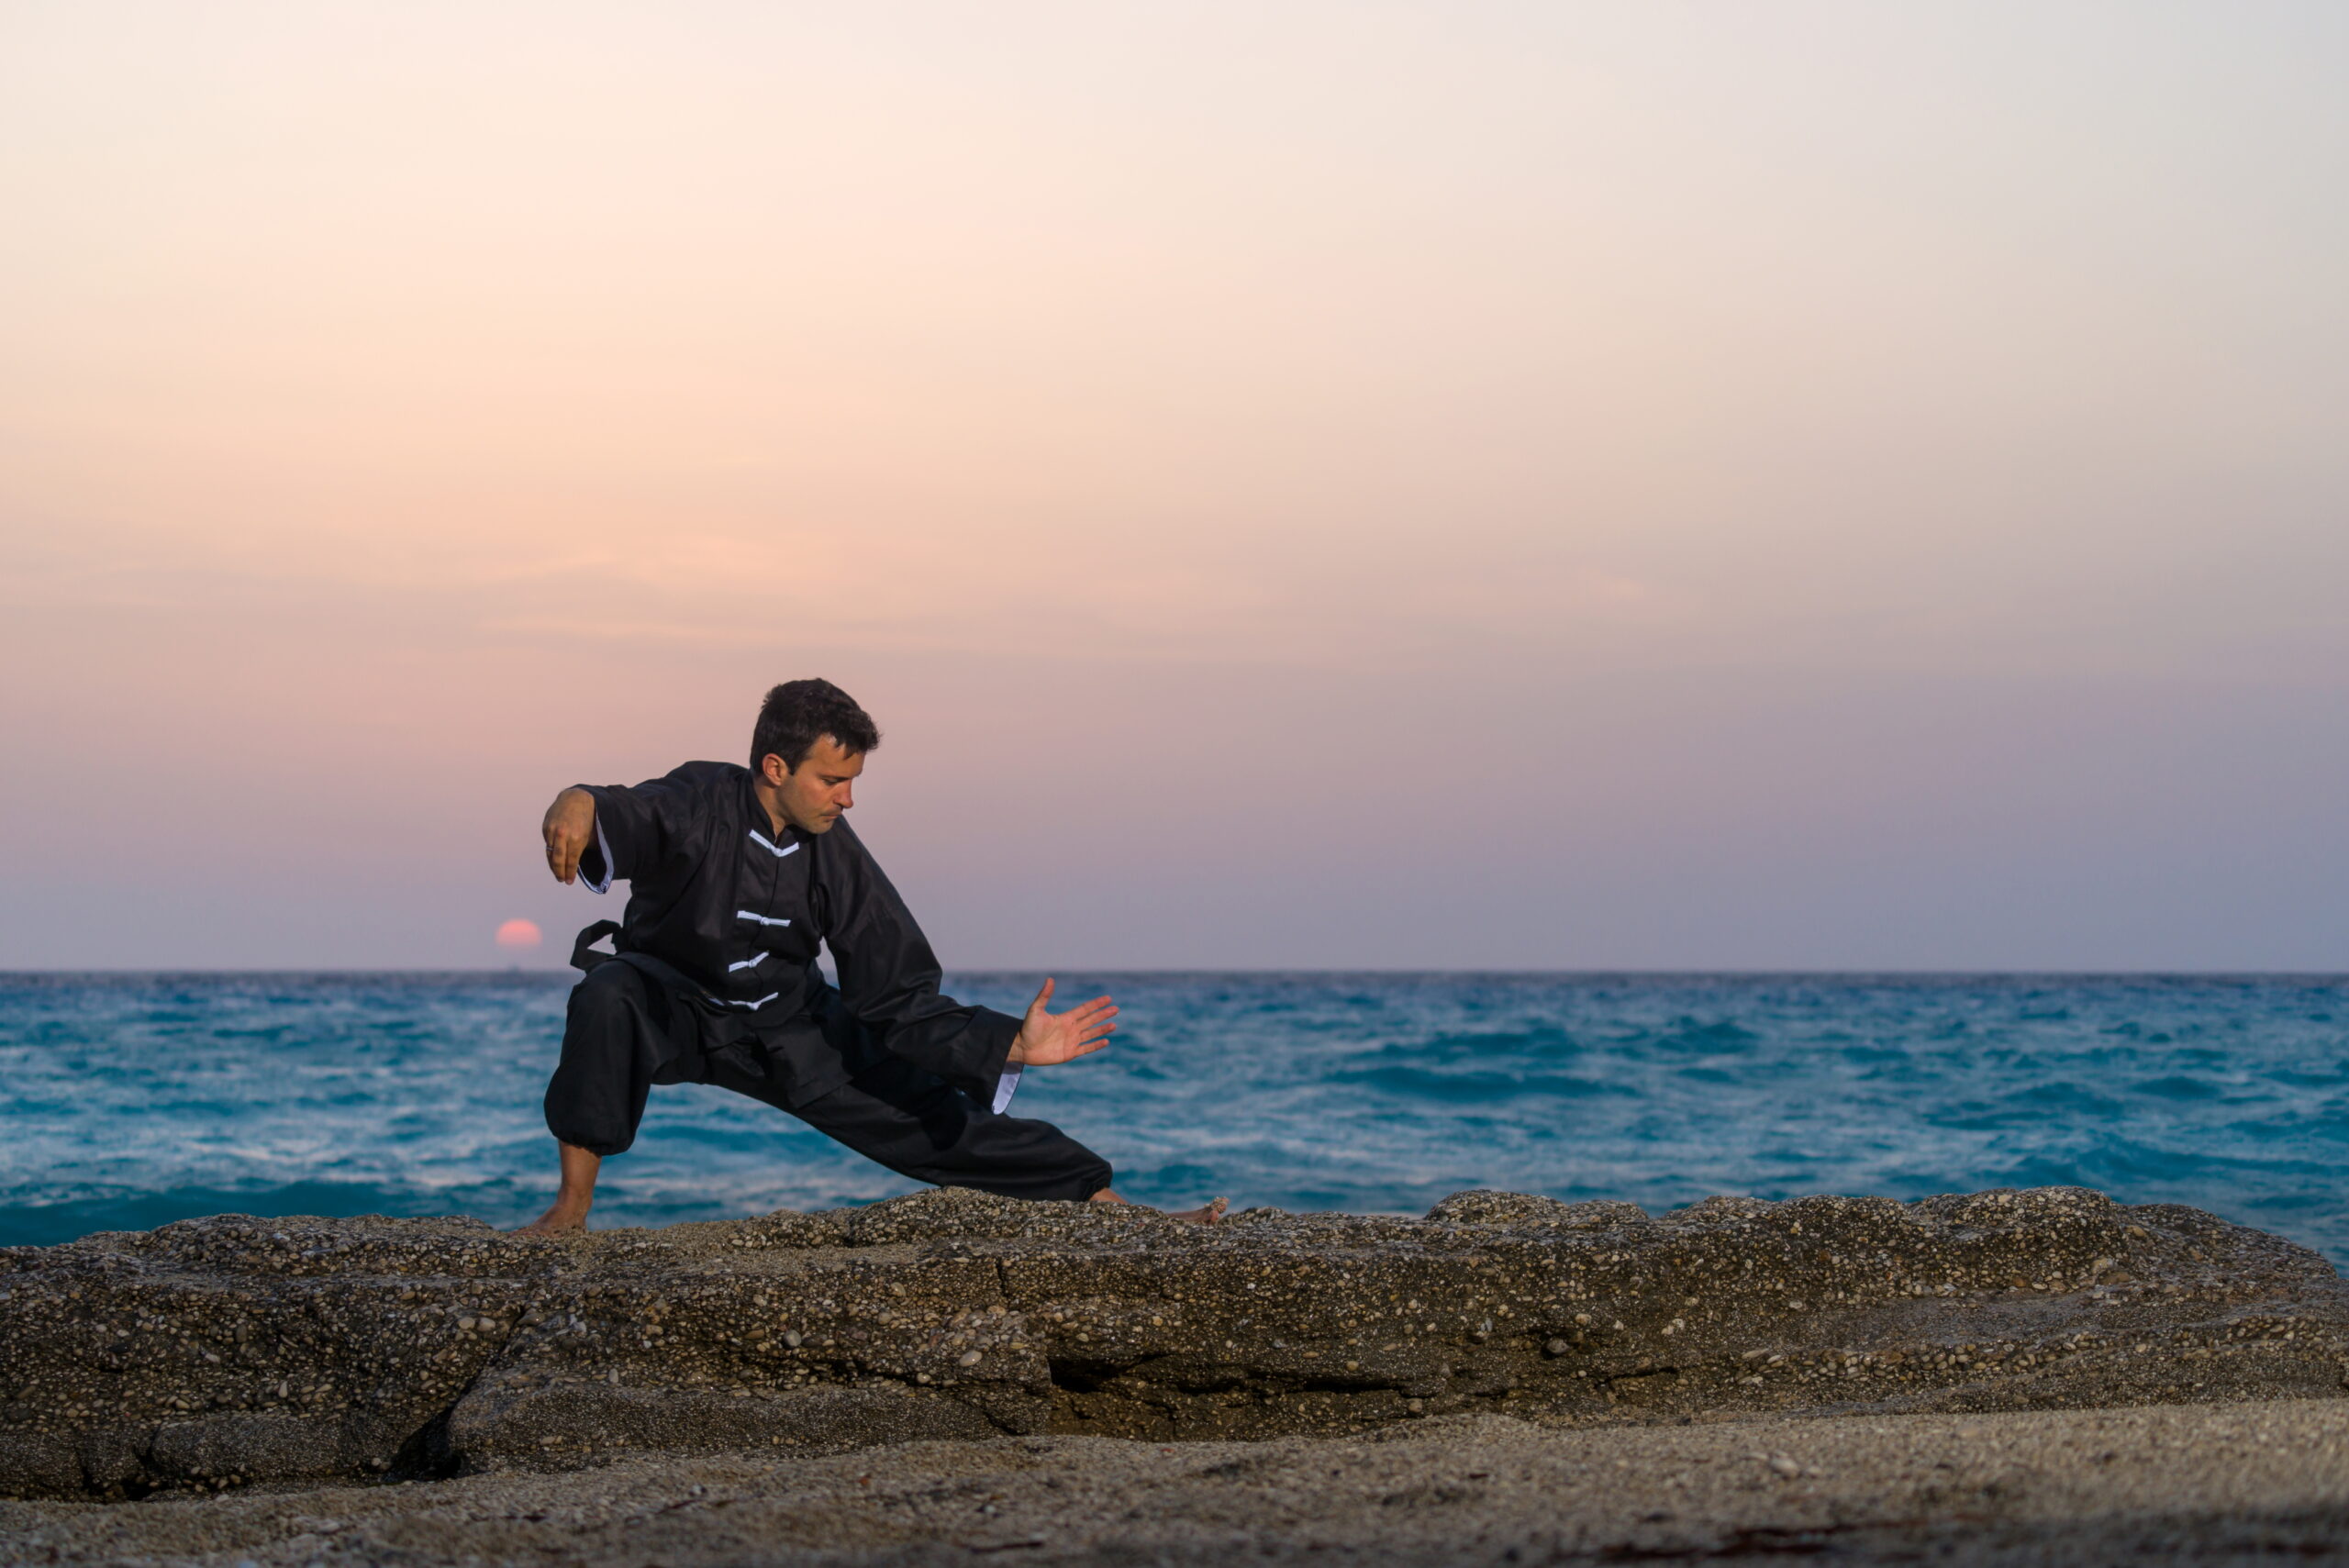 Man doing Kung Fu on beach with sunset - learn kung fu online